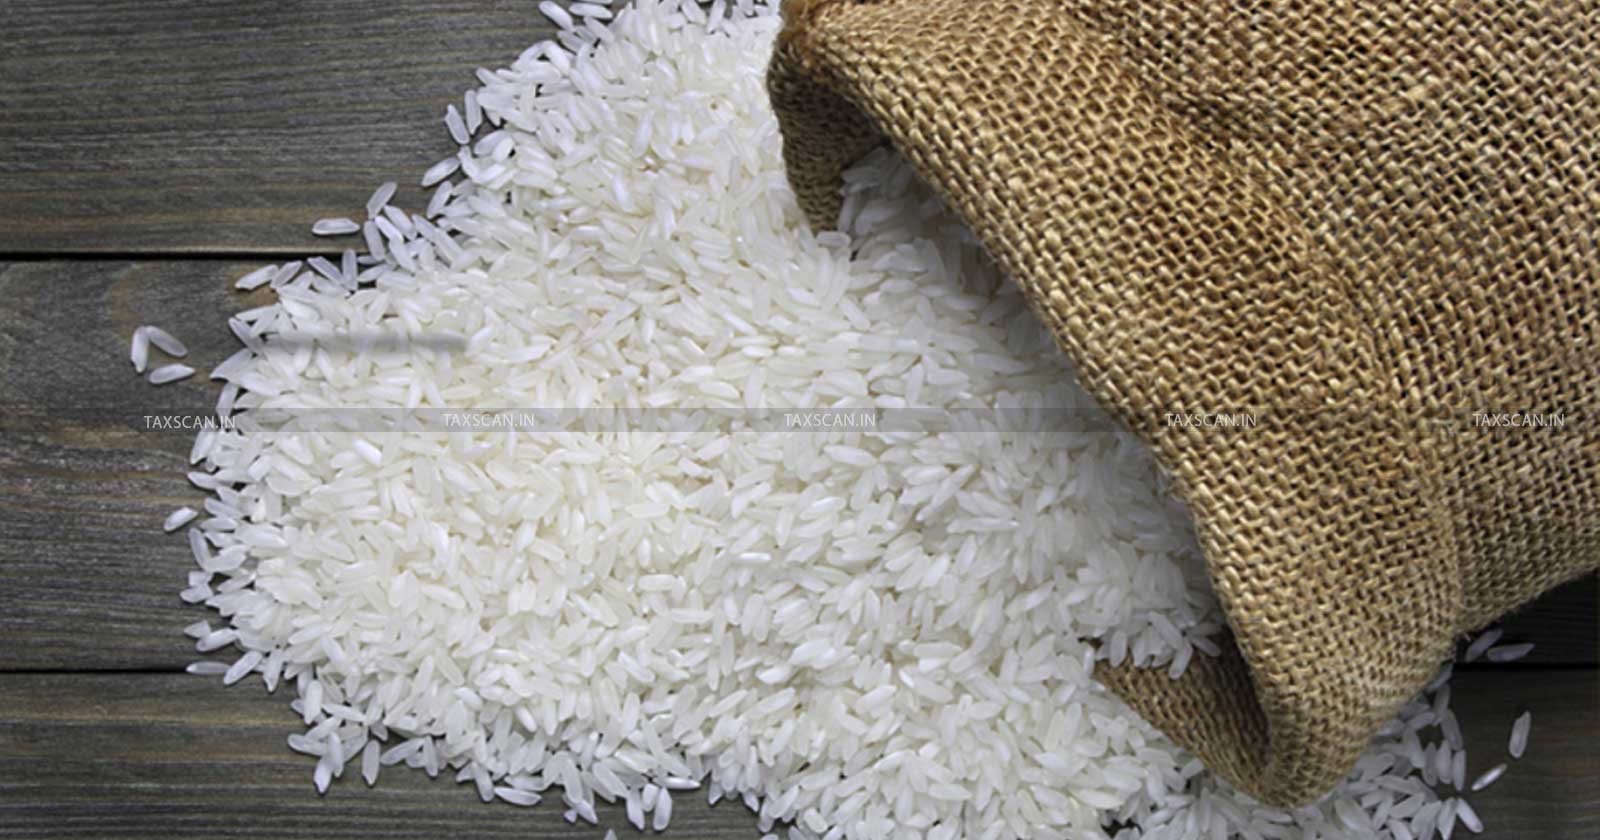 White Rice Export - Export to Mauritius - Non Basmati Rice Trade - Government Export Notification - TAXSCAN